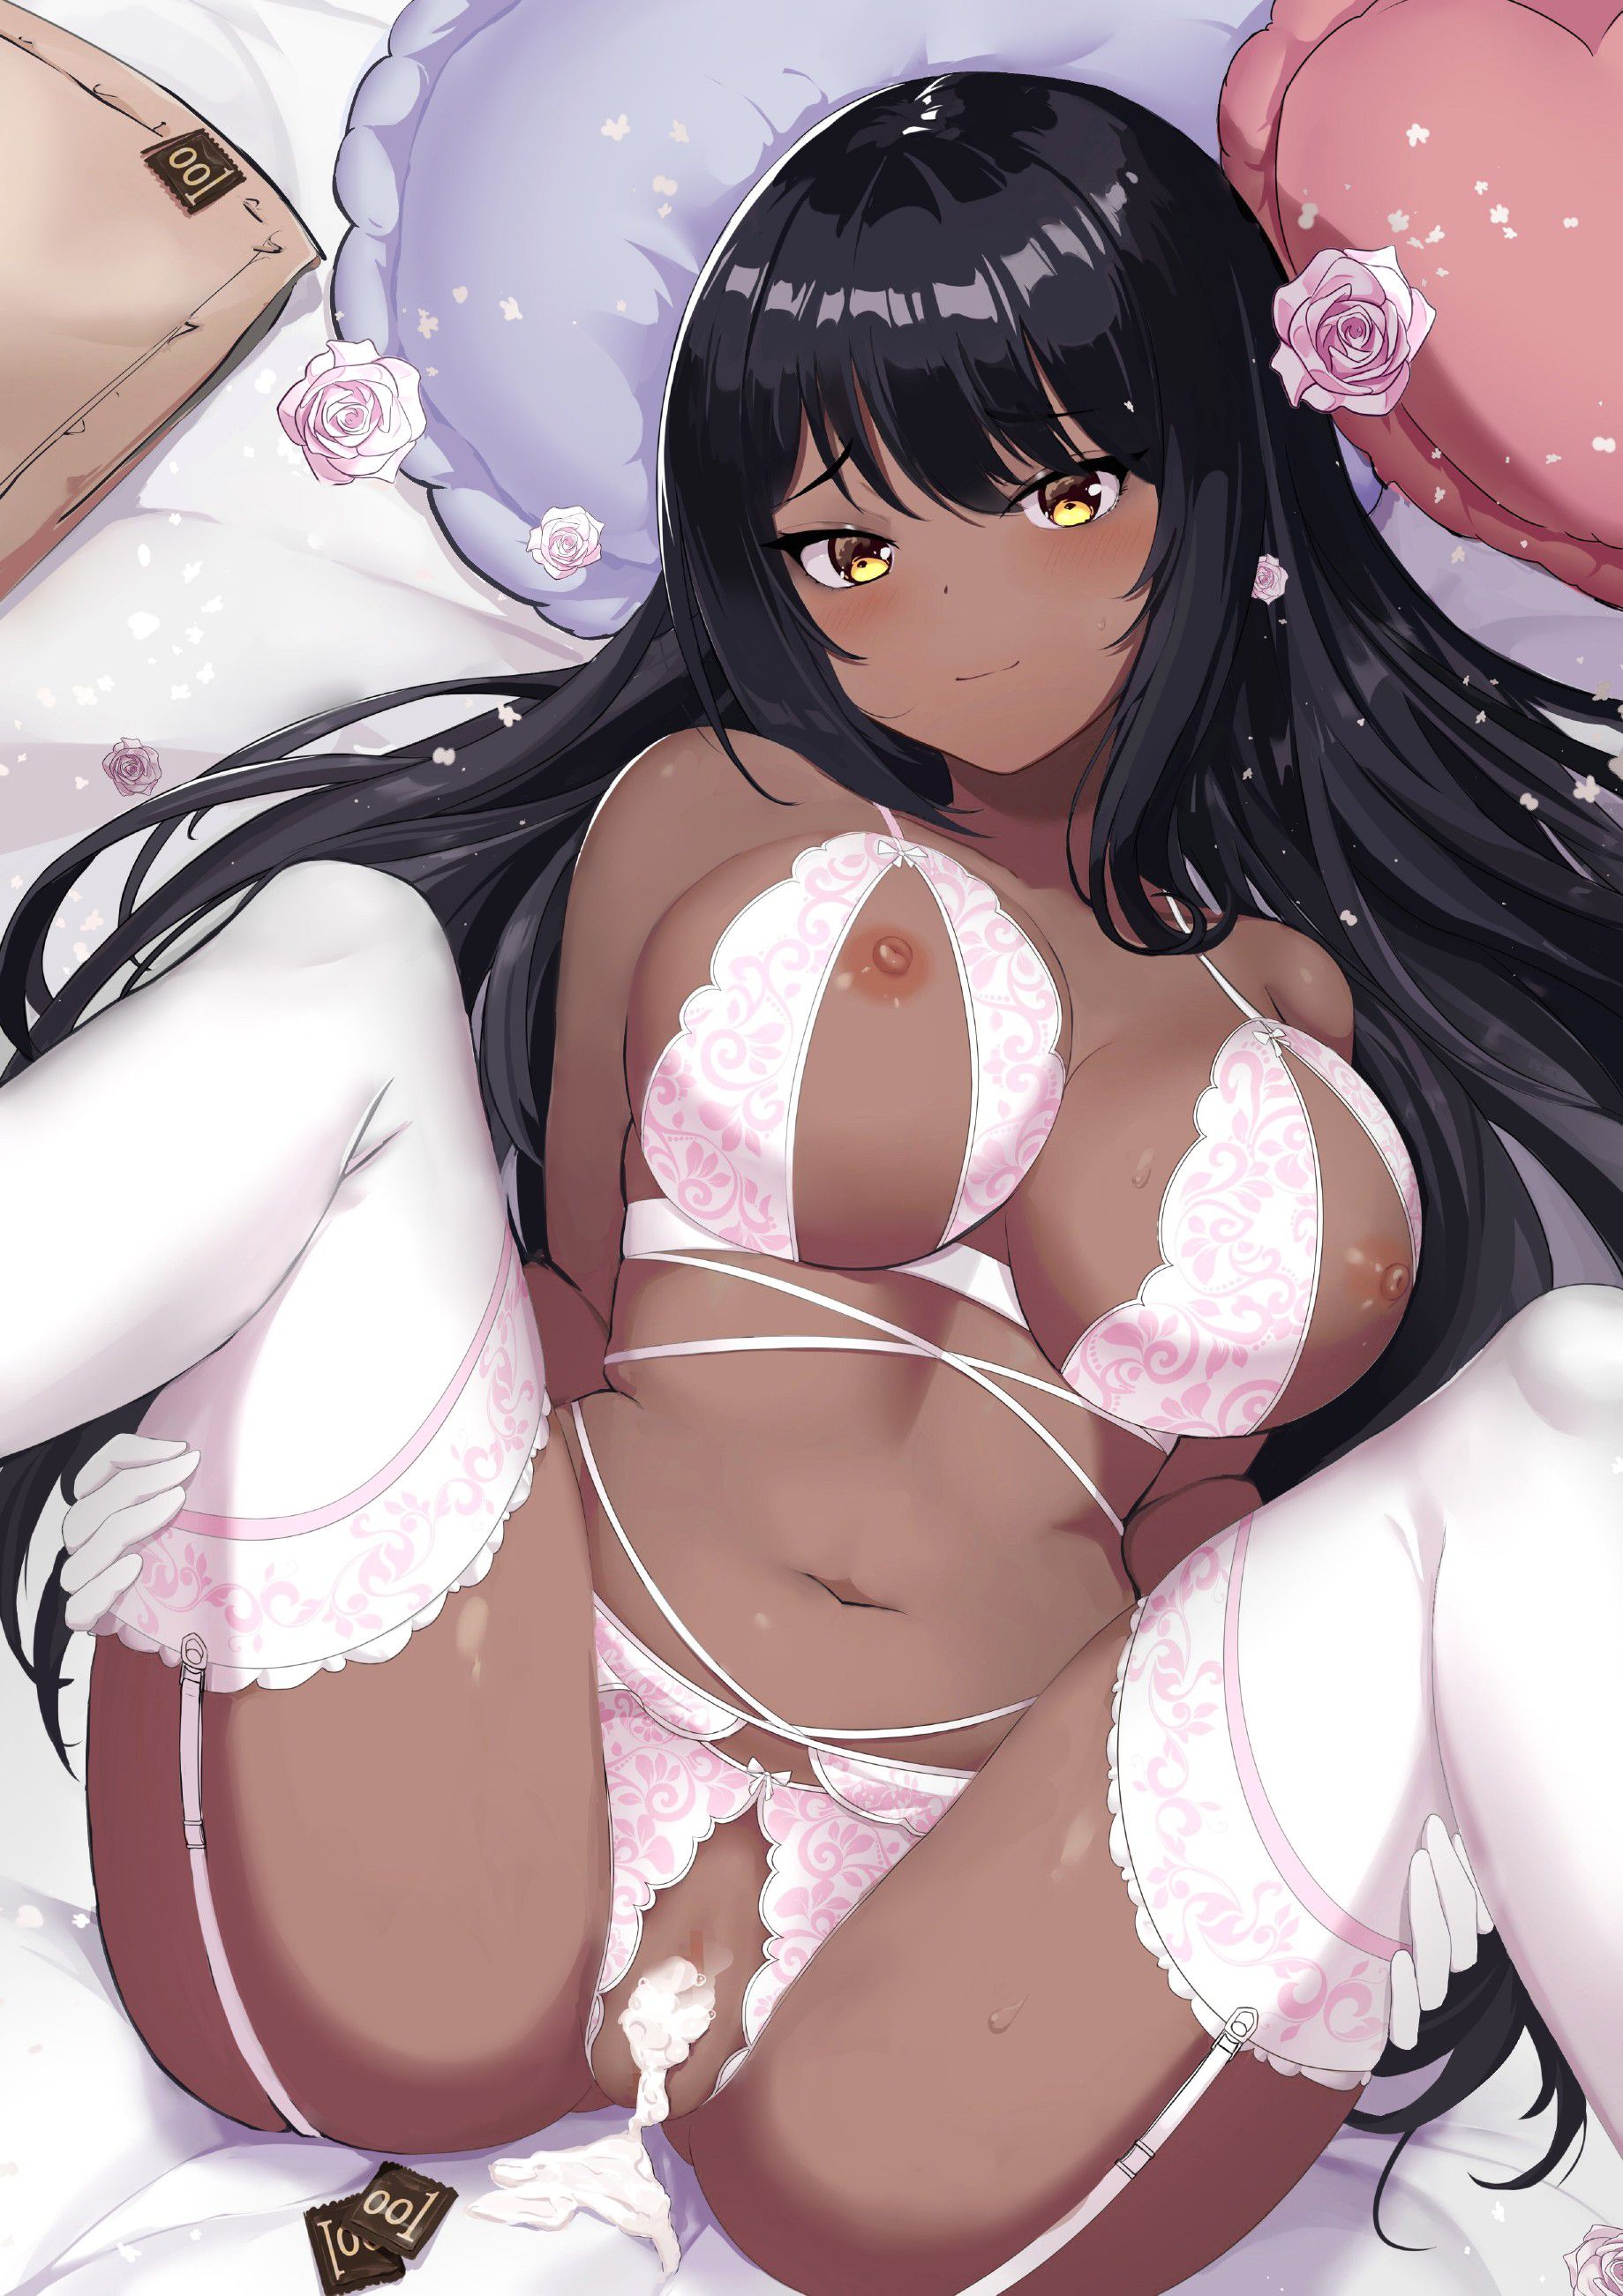 【2nd】 Erotic image of a girl wearing swimsuits and underwear Part 58 23